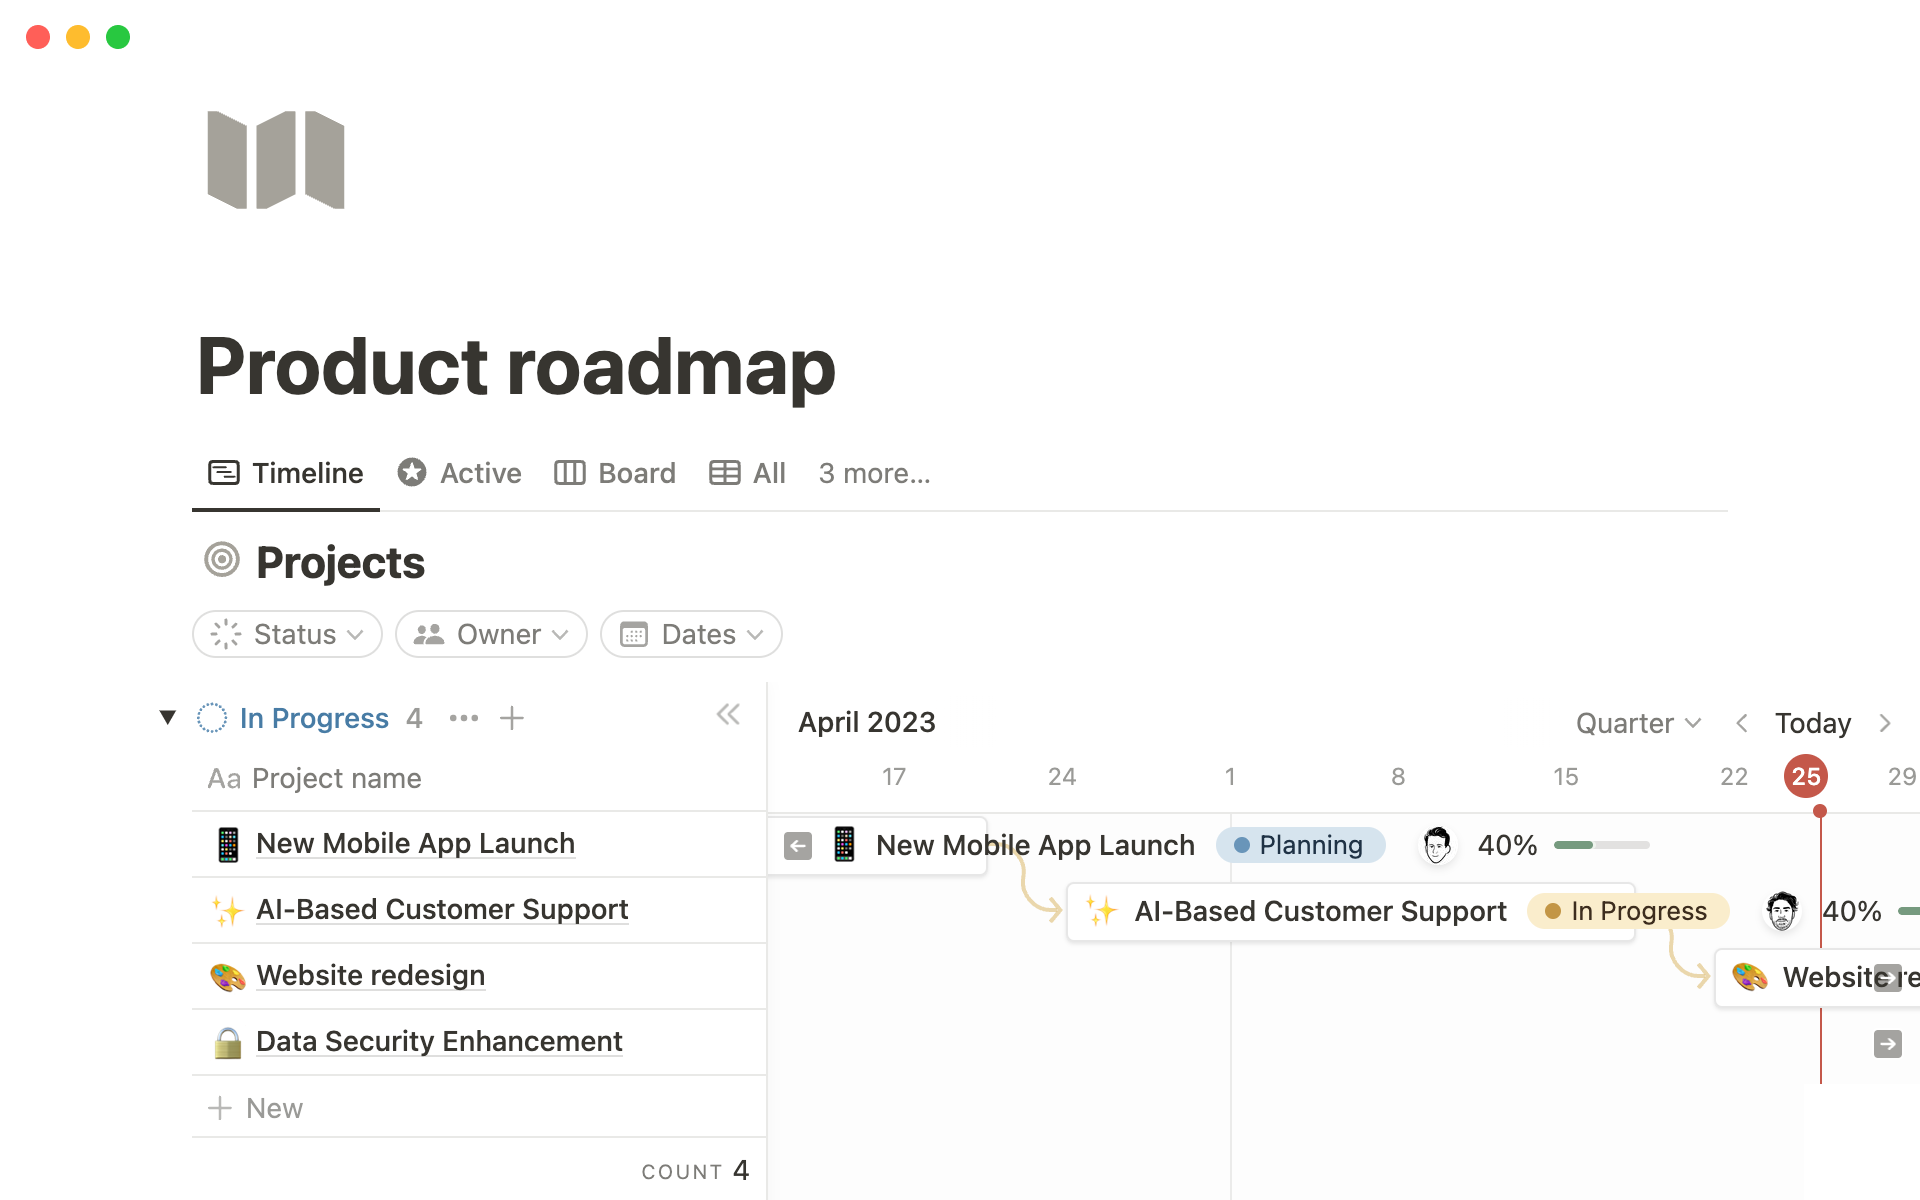 Screenshot of Best 10 Product Roadmap Templates for Product Designers collection by Notion